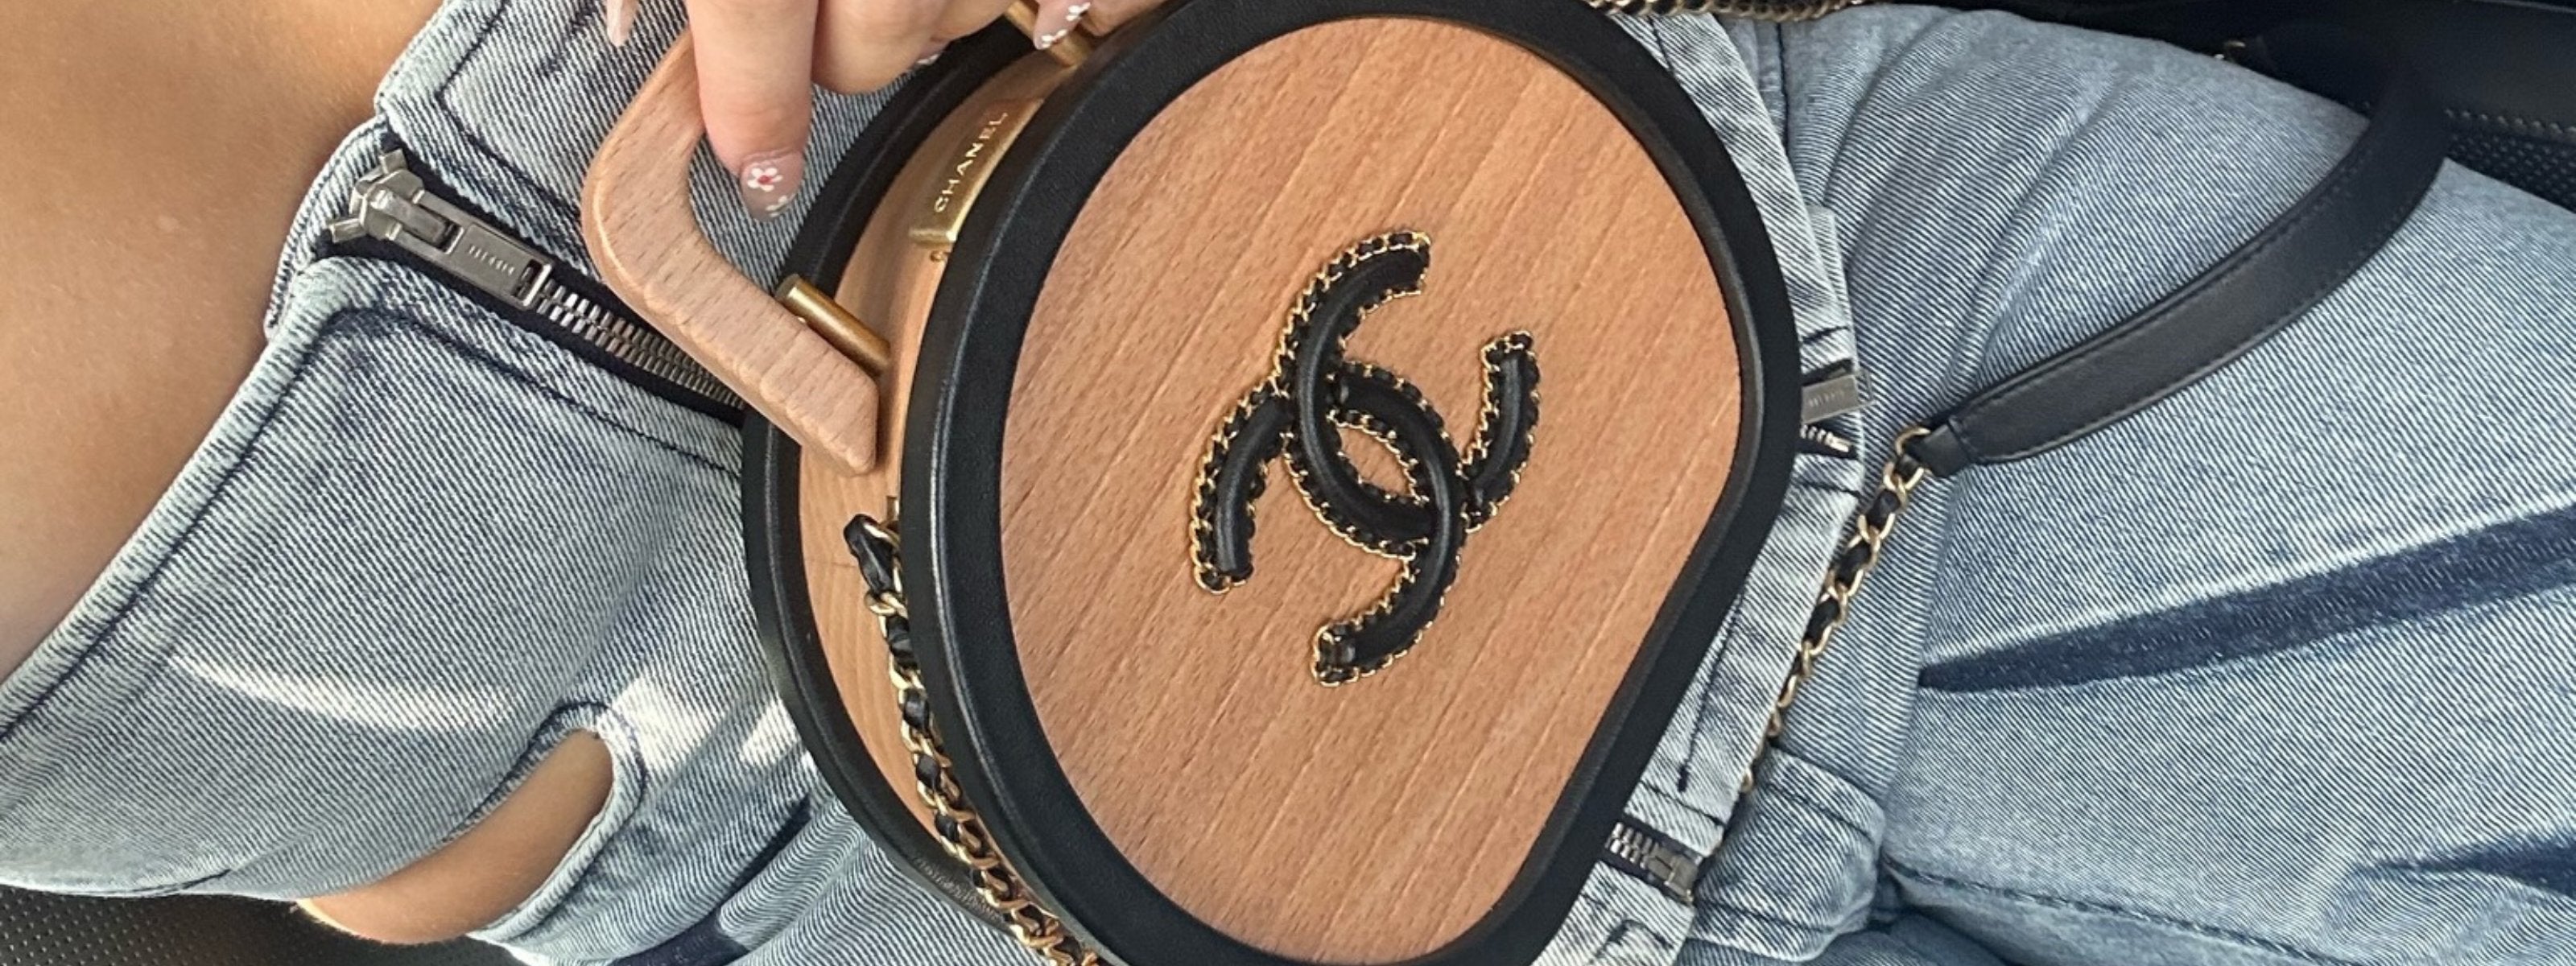 Exclusive Chanel Bags